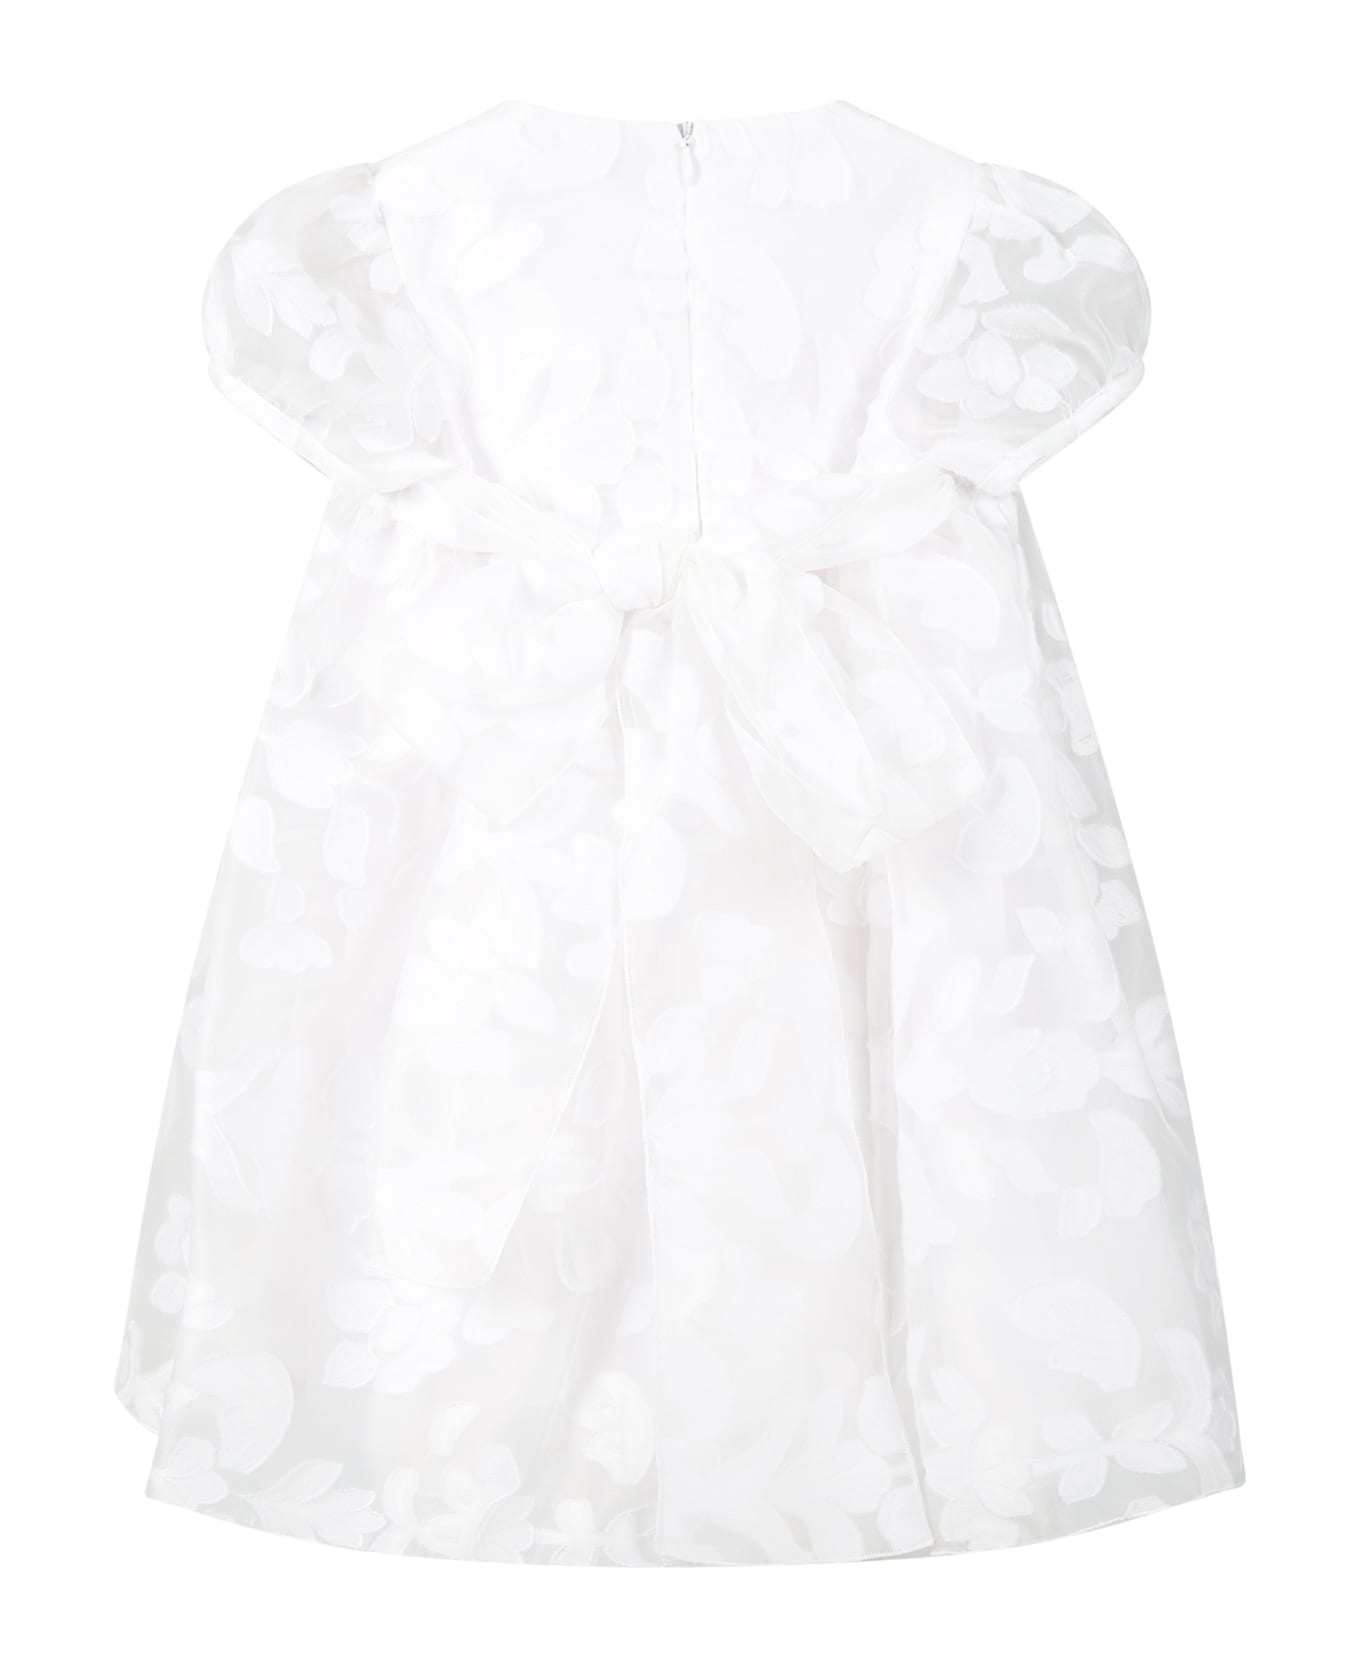 Little Bear White Dress For Baby Girl With Floral Details - White ウェア